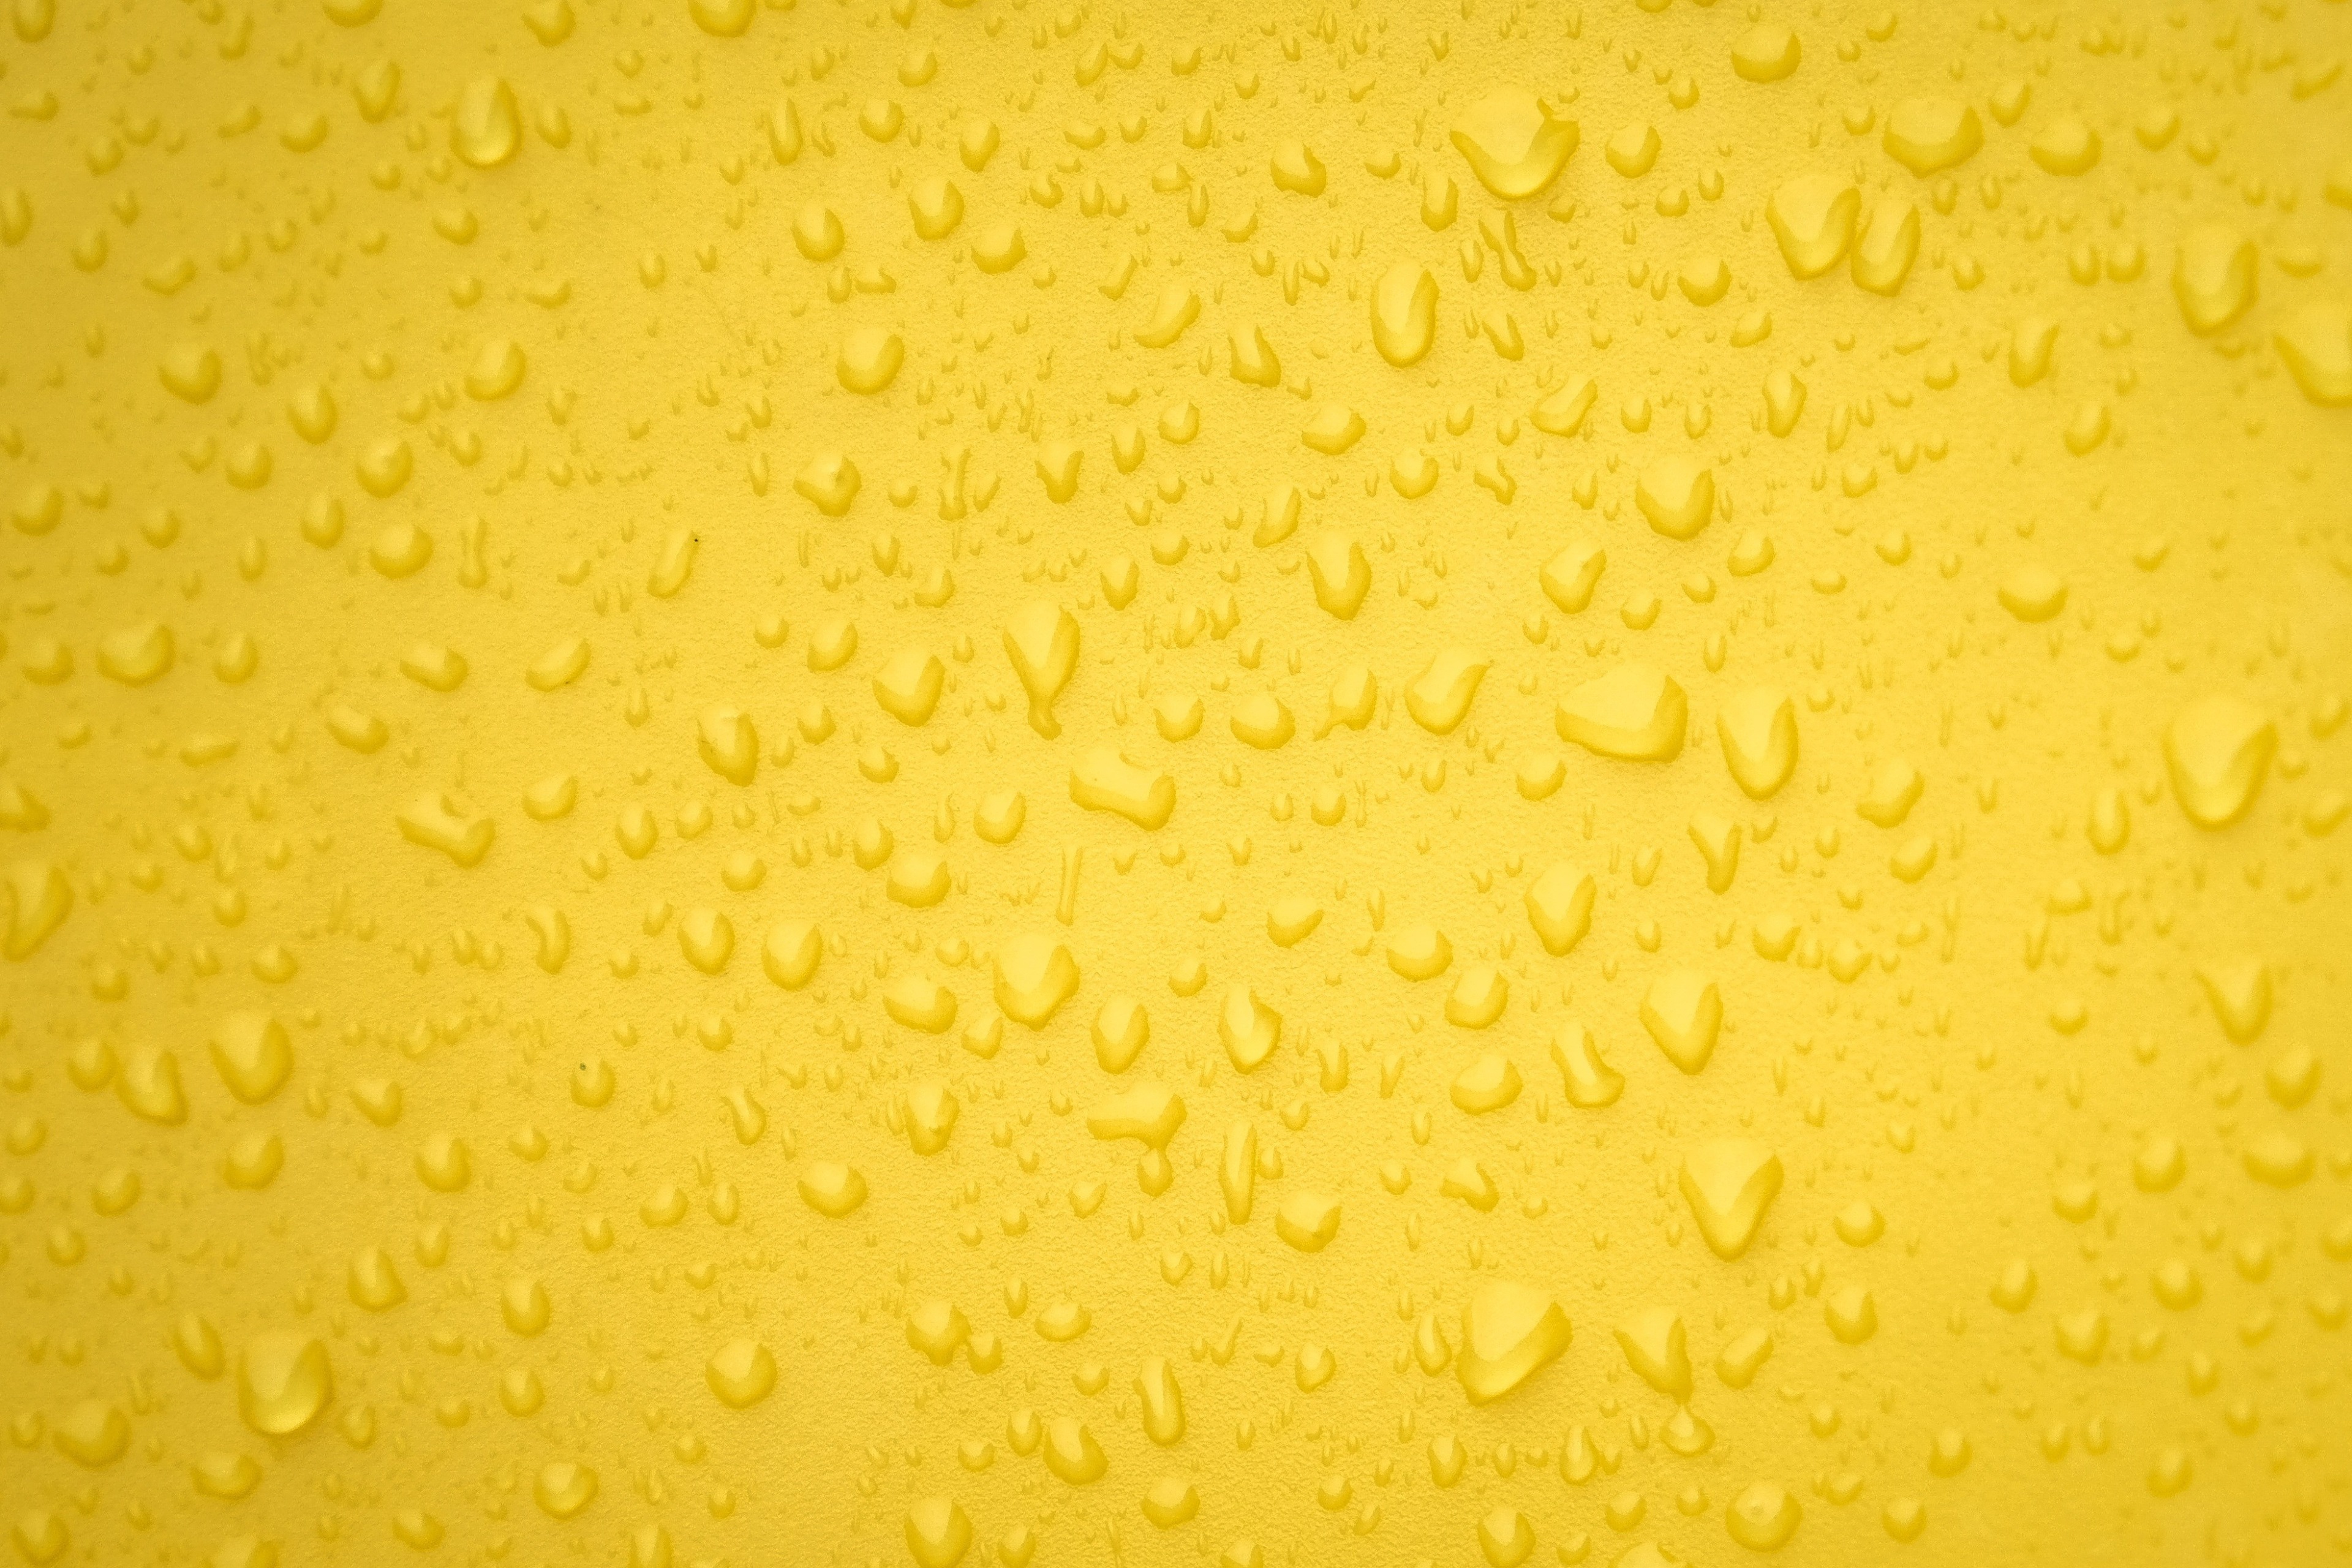 Water 4k Ultra High Definition Wallpaper - Yellow Cover Photo For Youtube , HD Wallpaper & Backgrounds